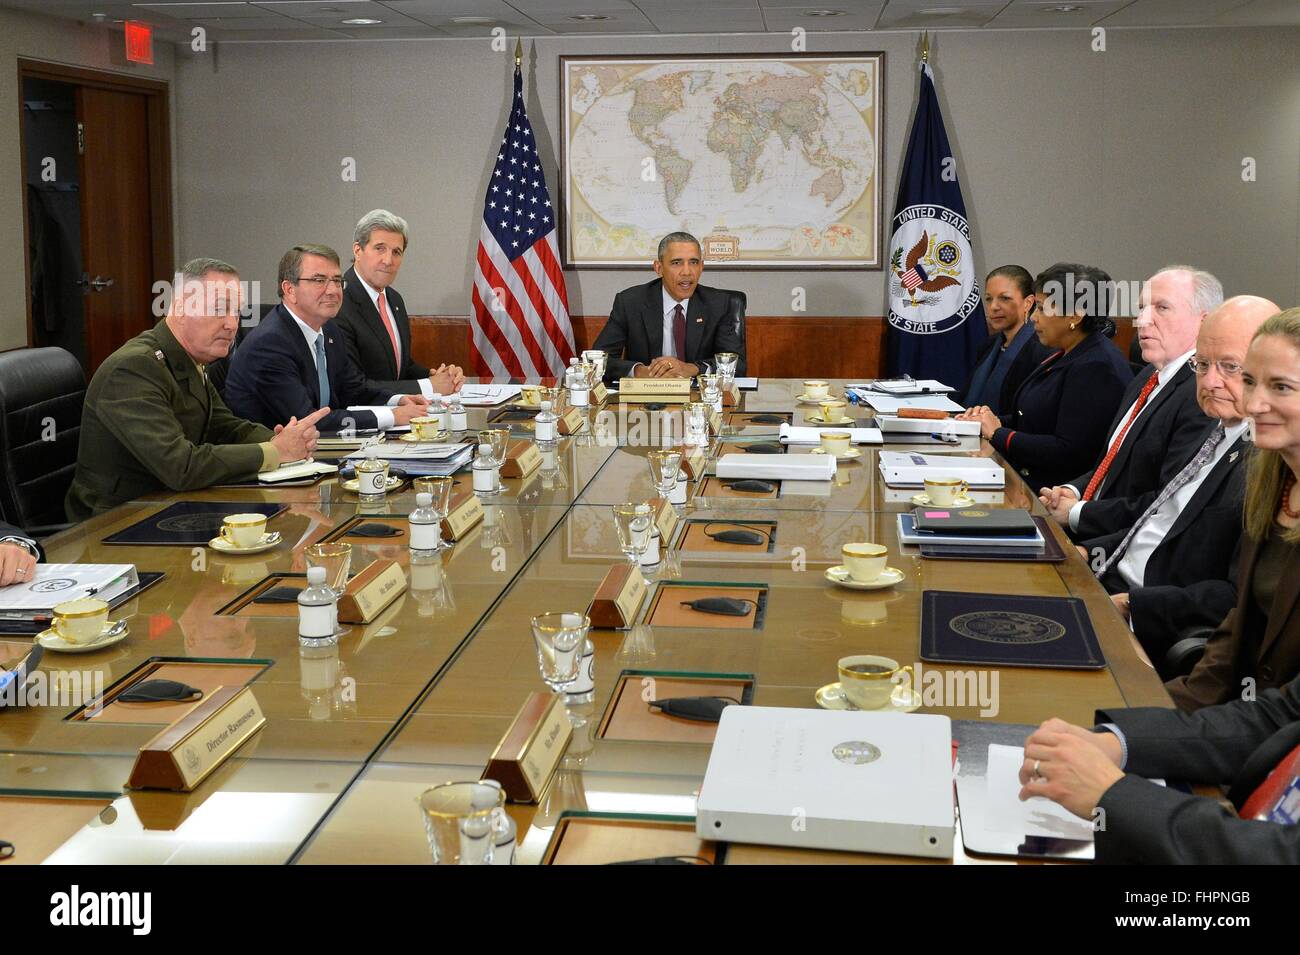 Washington DC, USA. 25th February, 2016. U.S President Barack Obama flanked by Secretary of State John Kerry and Defense Secretary Ashton Carter and Joint Chiefs Chairman Gen. Joseph Dunford, during a meeting with the National Security Council on the global campaign to degrade and destroy ISIL at the State Department February 25, 2016 in Washington, DC.  Obama ordered his national security team to 'continue accelerating' the U.S led military campaign against the Islamic State. Stock Photo